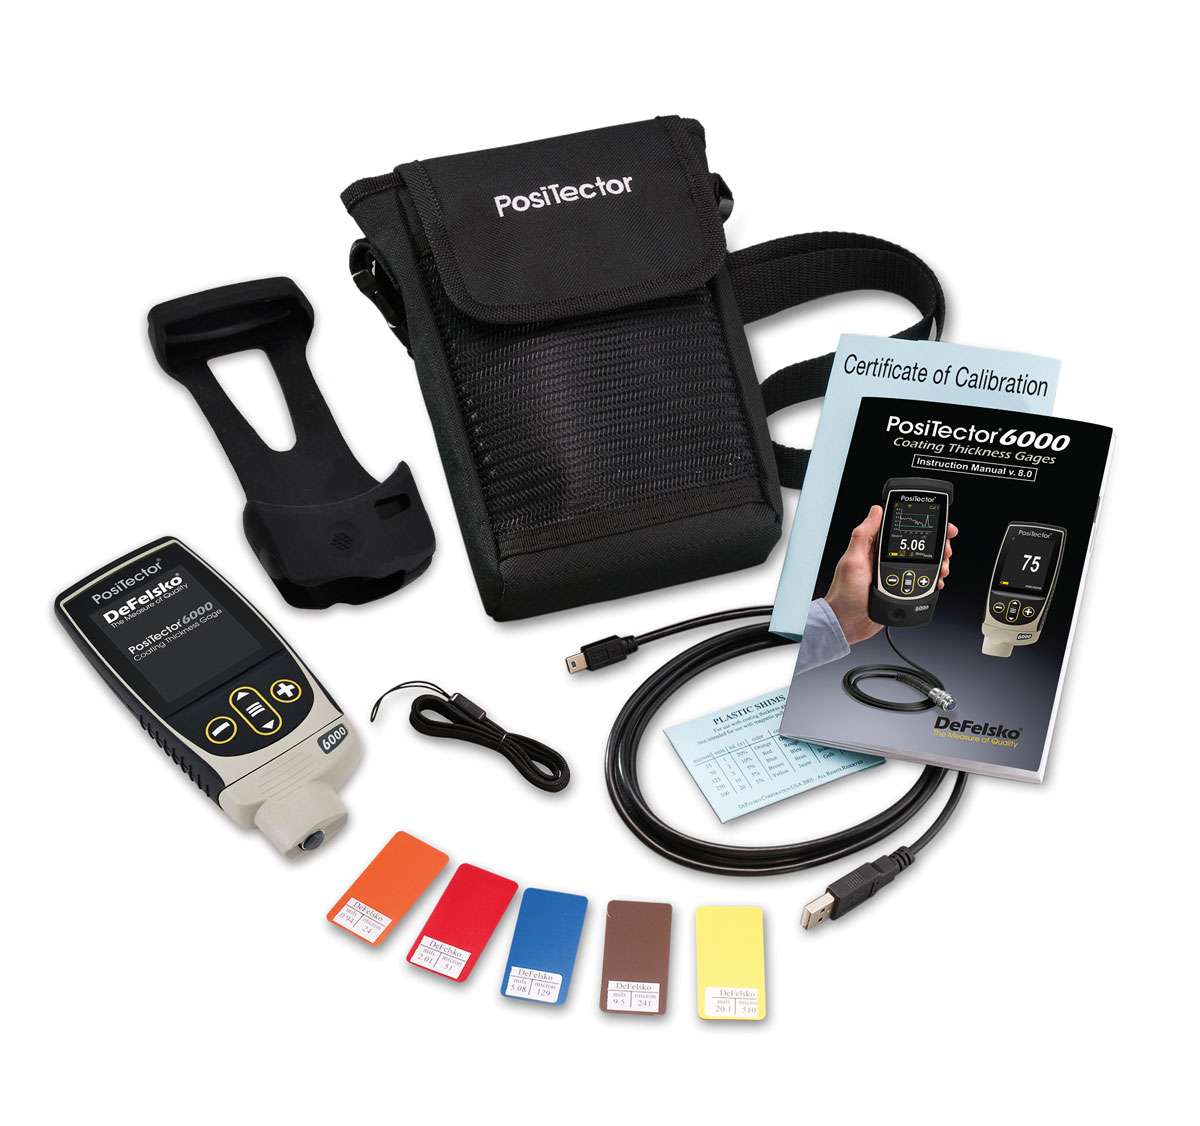 The complete kit included with the Positector 6000GS Series